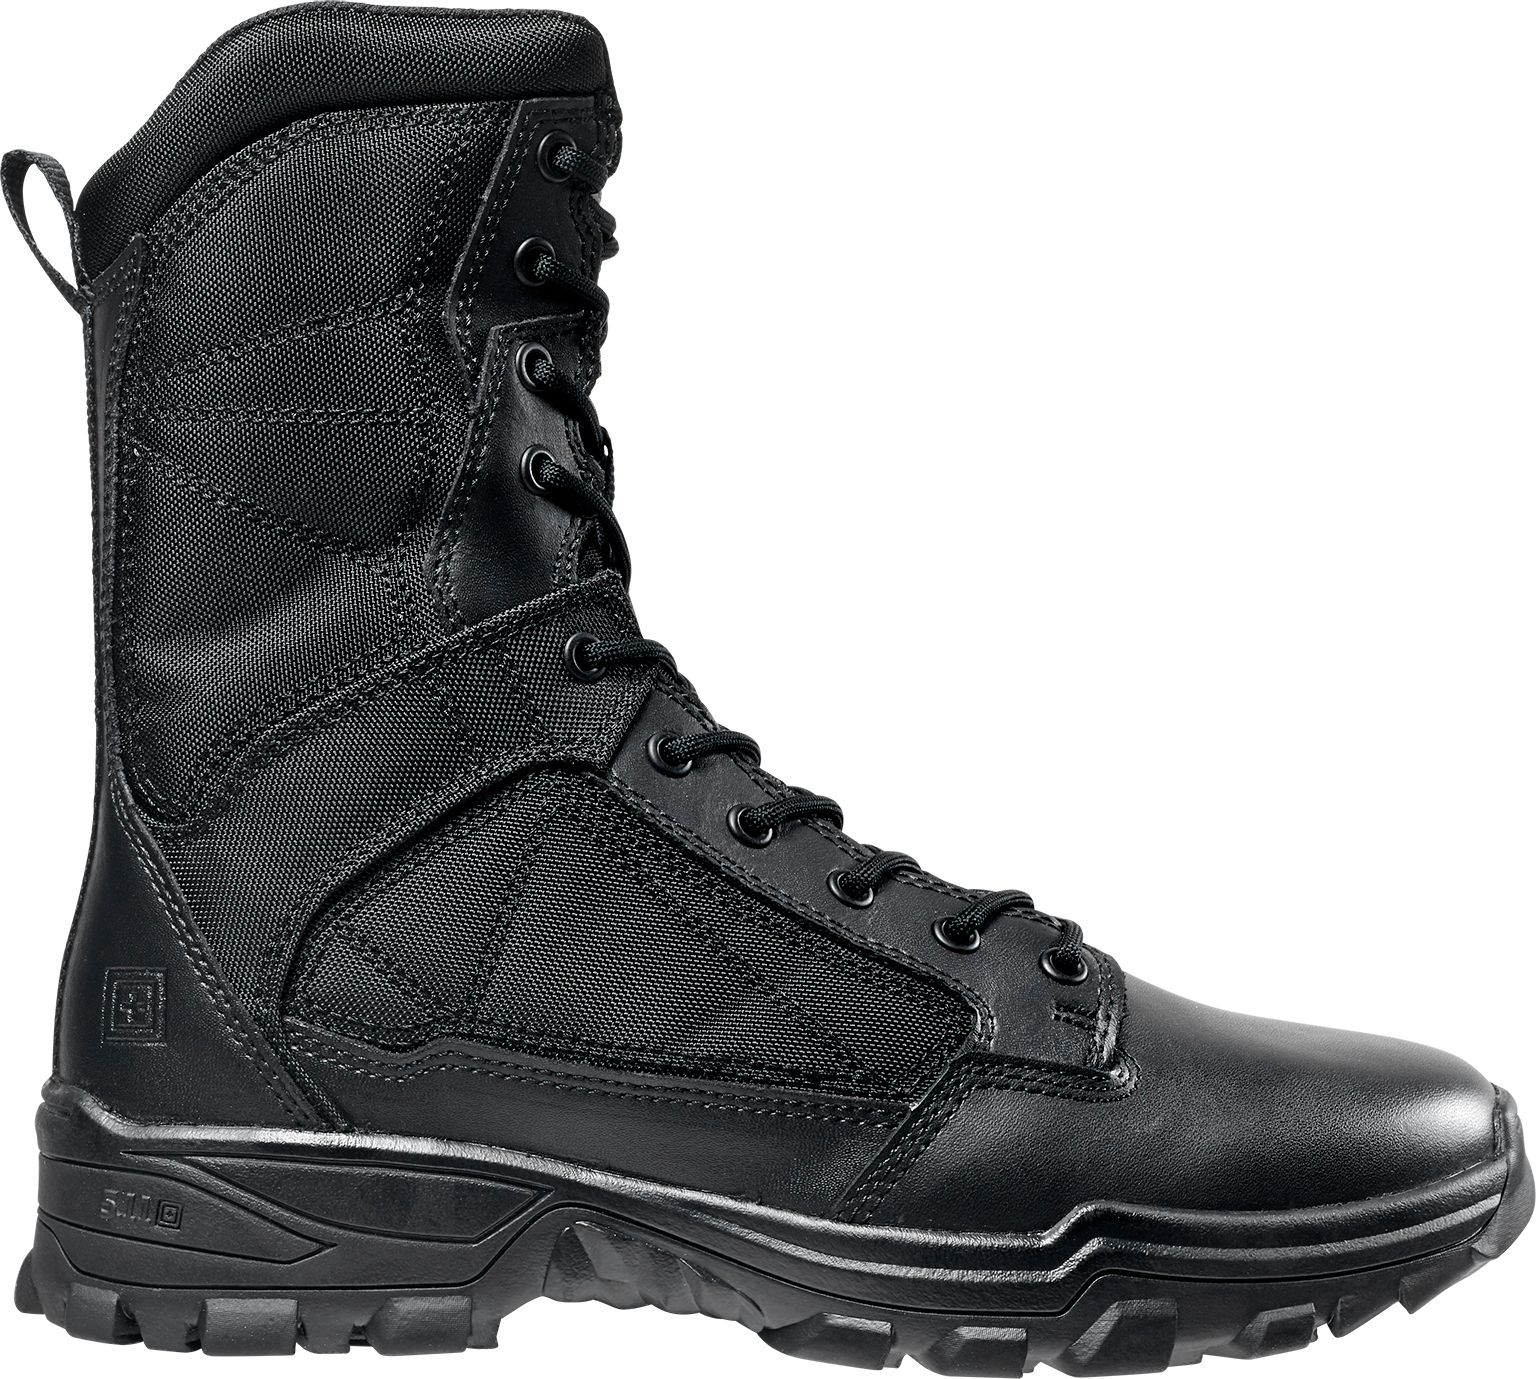 5.11 tactical boots near me